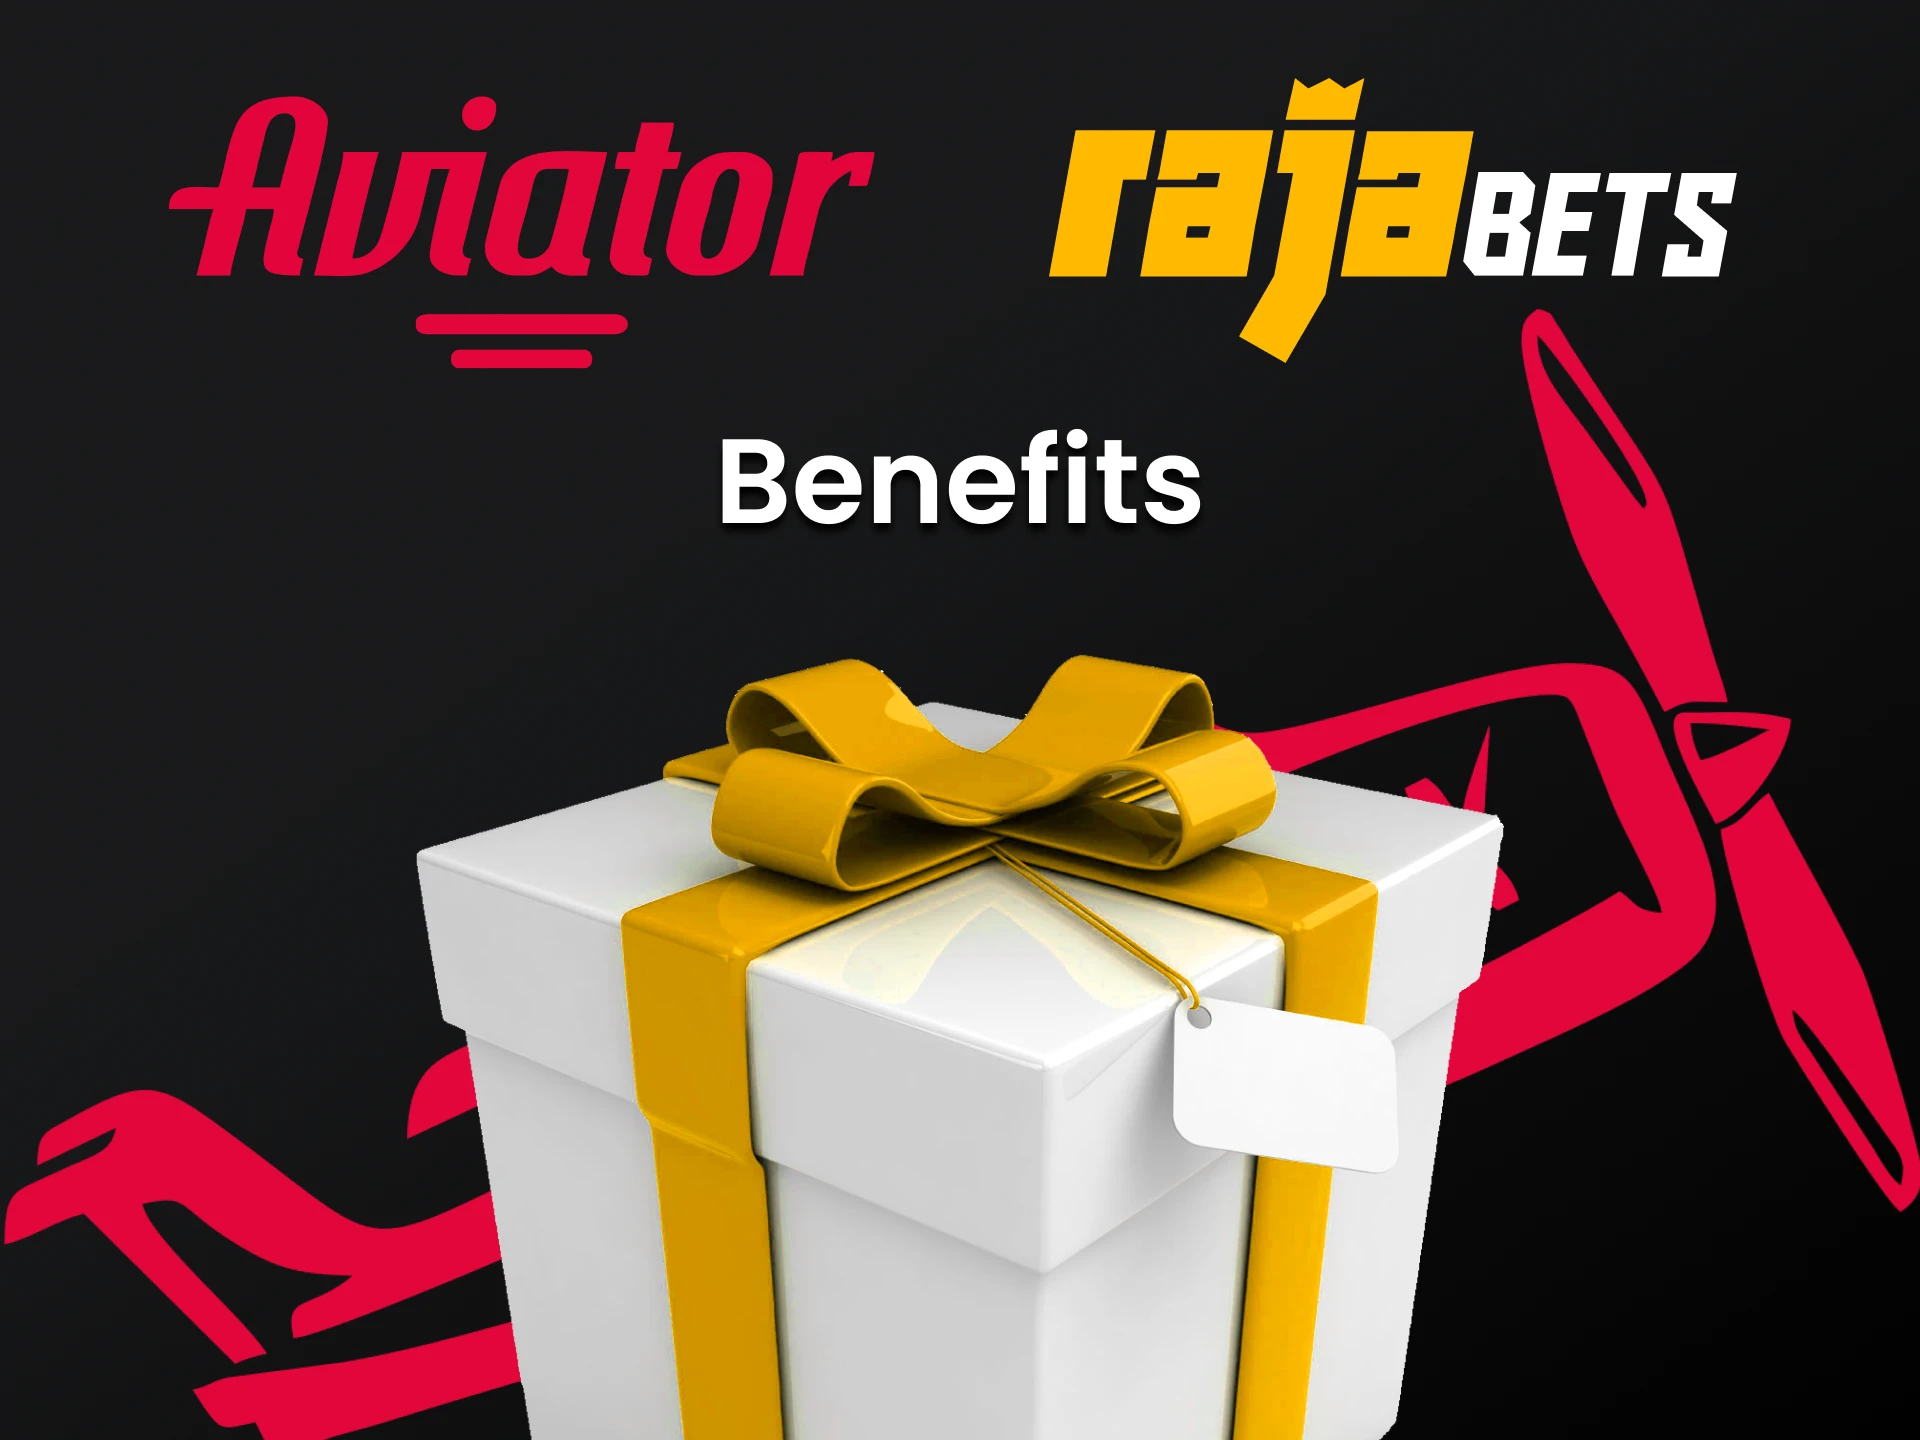 By choosing Rajabets you will get many benefits.